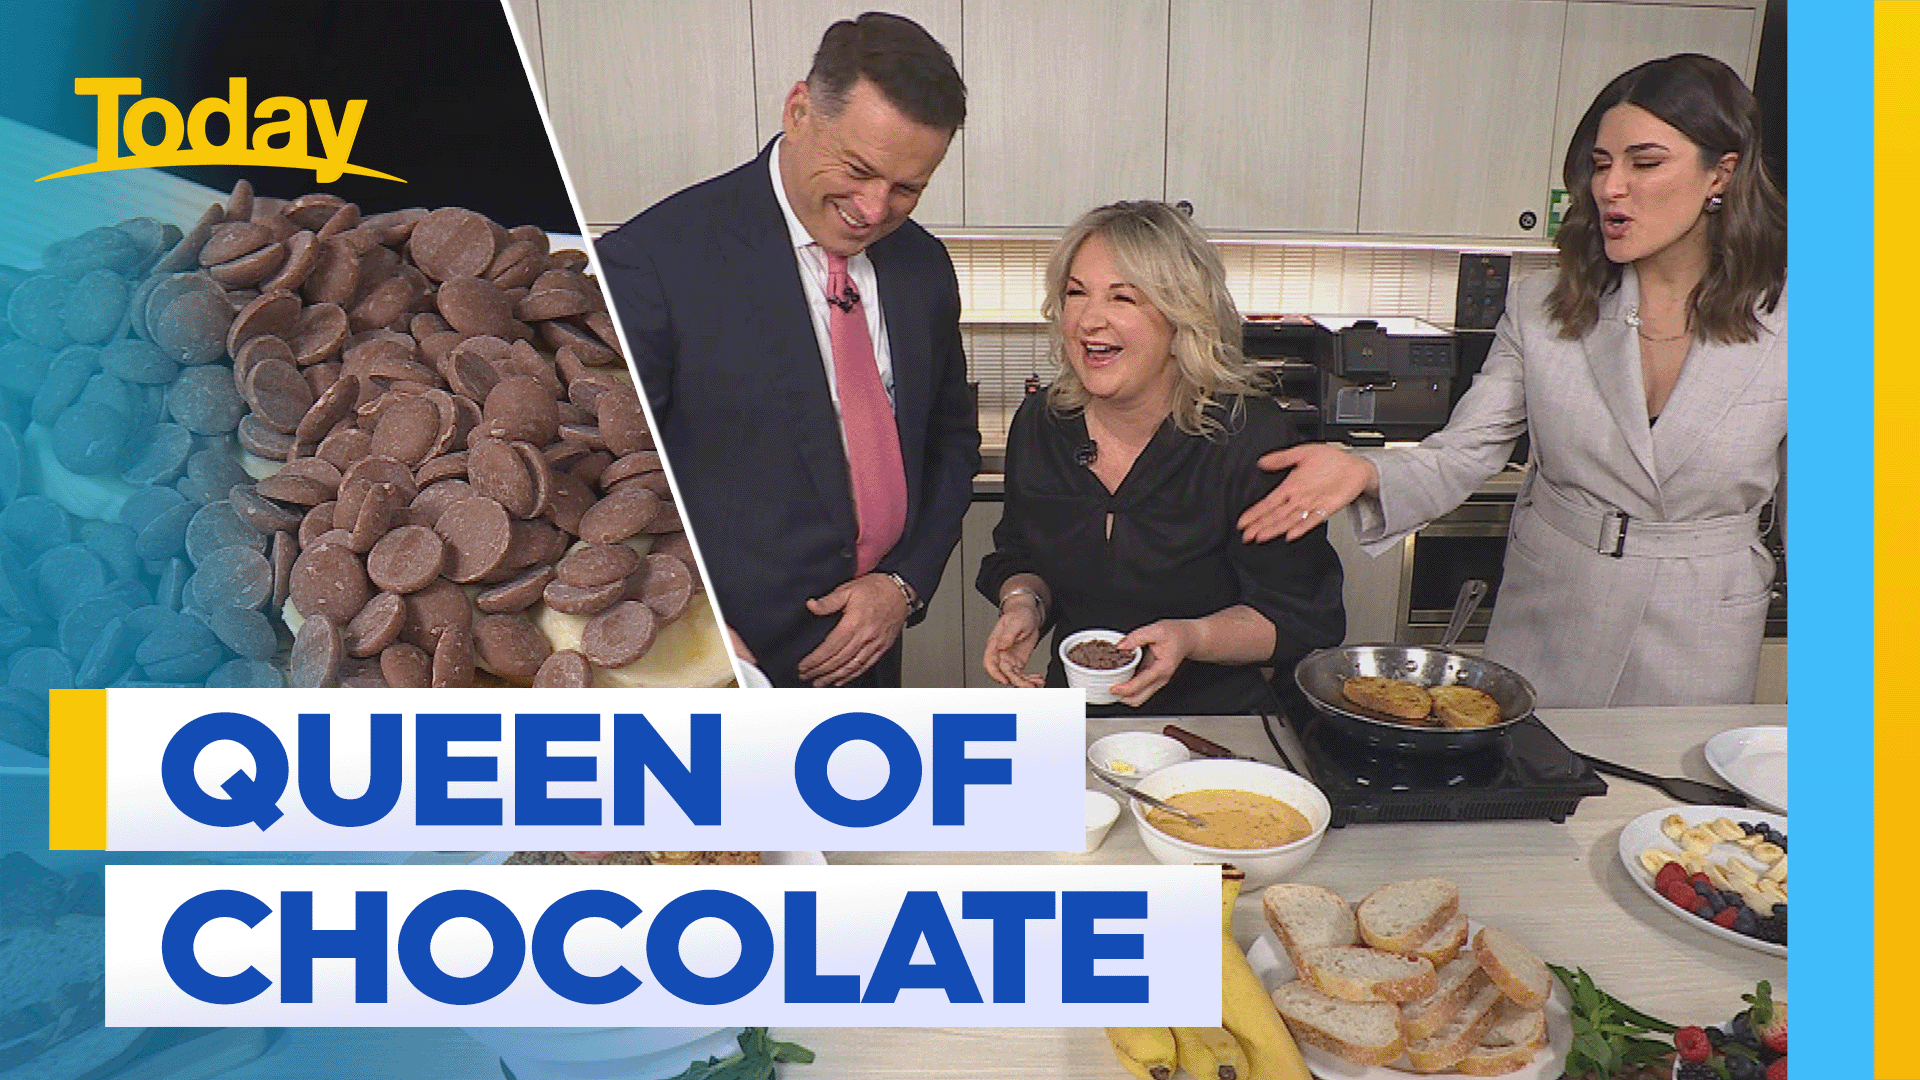 Chocolate queen gives us a tasty cooking lesson